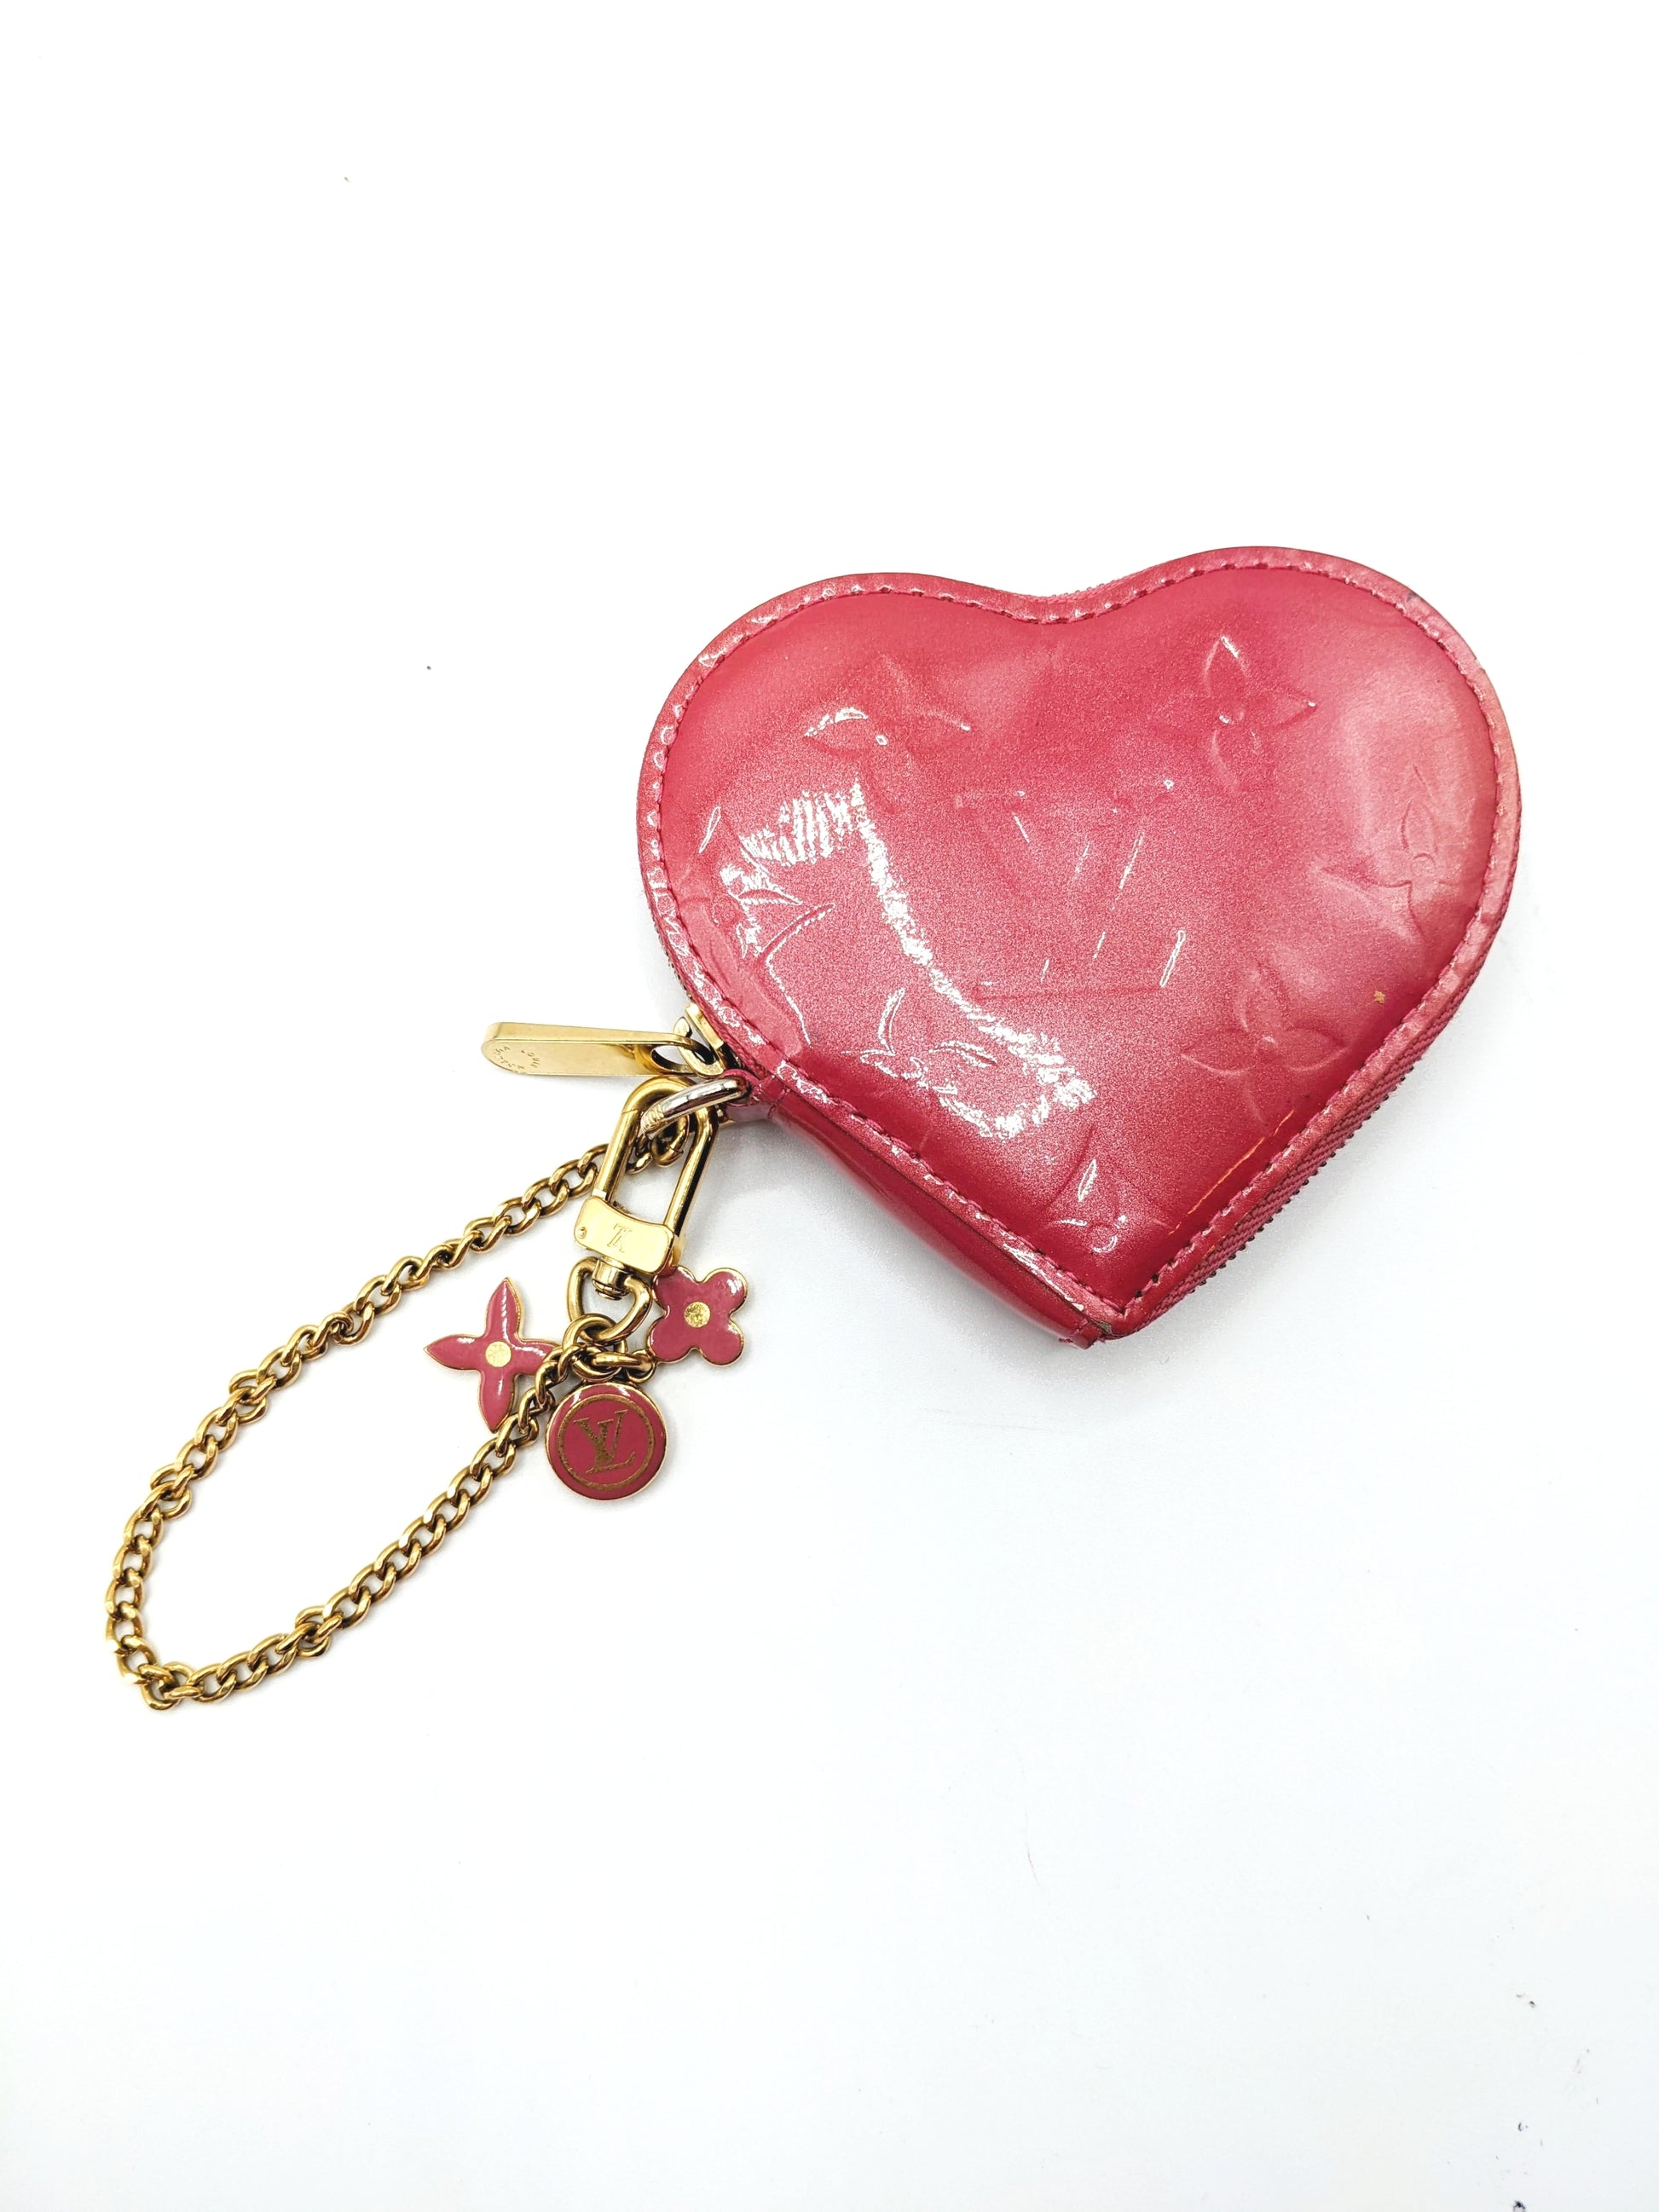 What Goes Around Comes Around Louis Vuitton Purple Vernis Heart Coin Purse